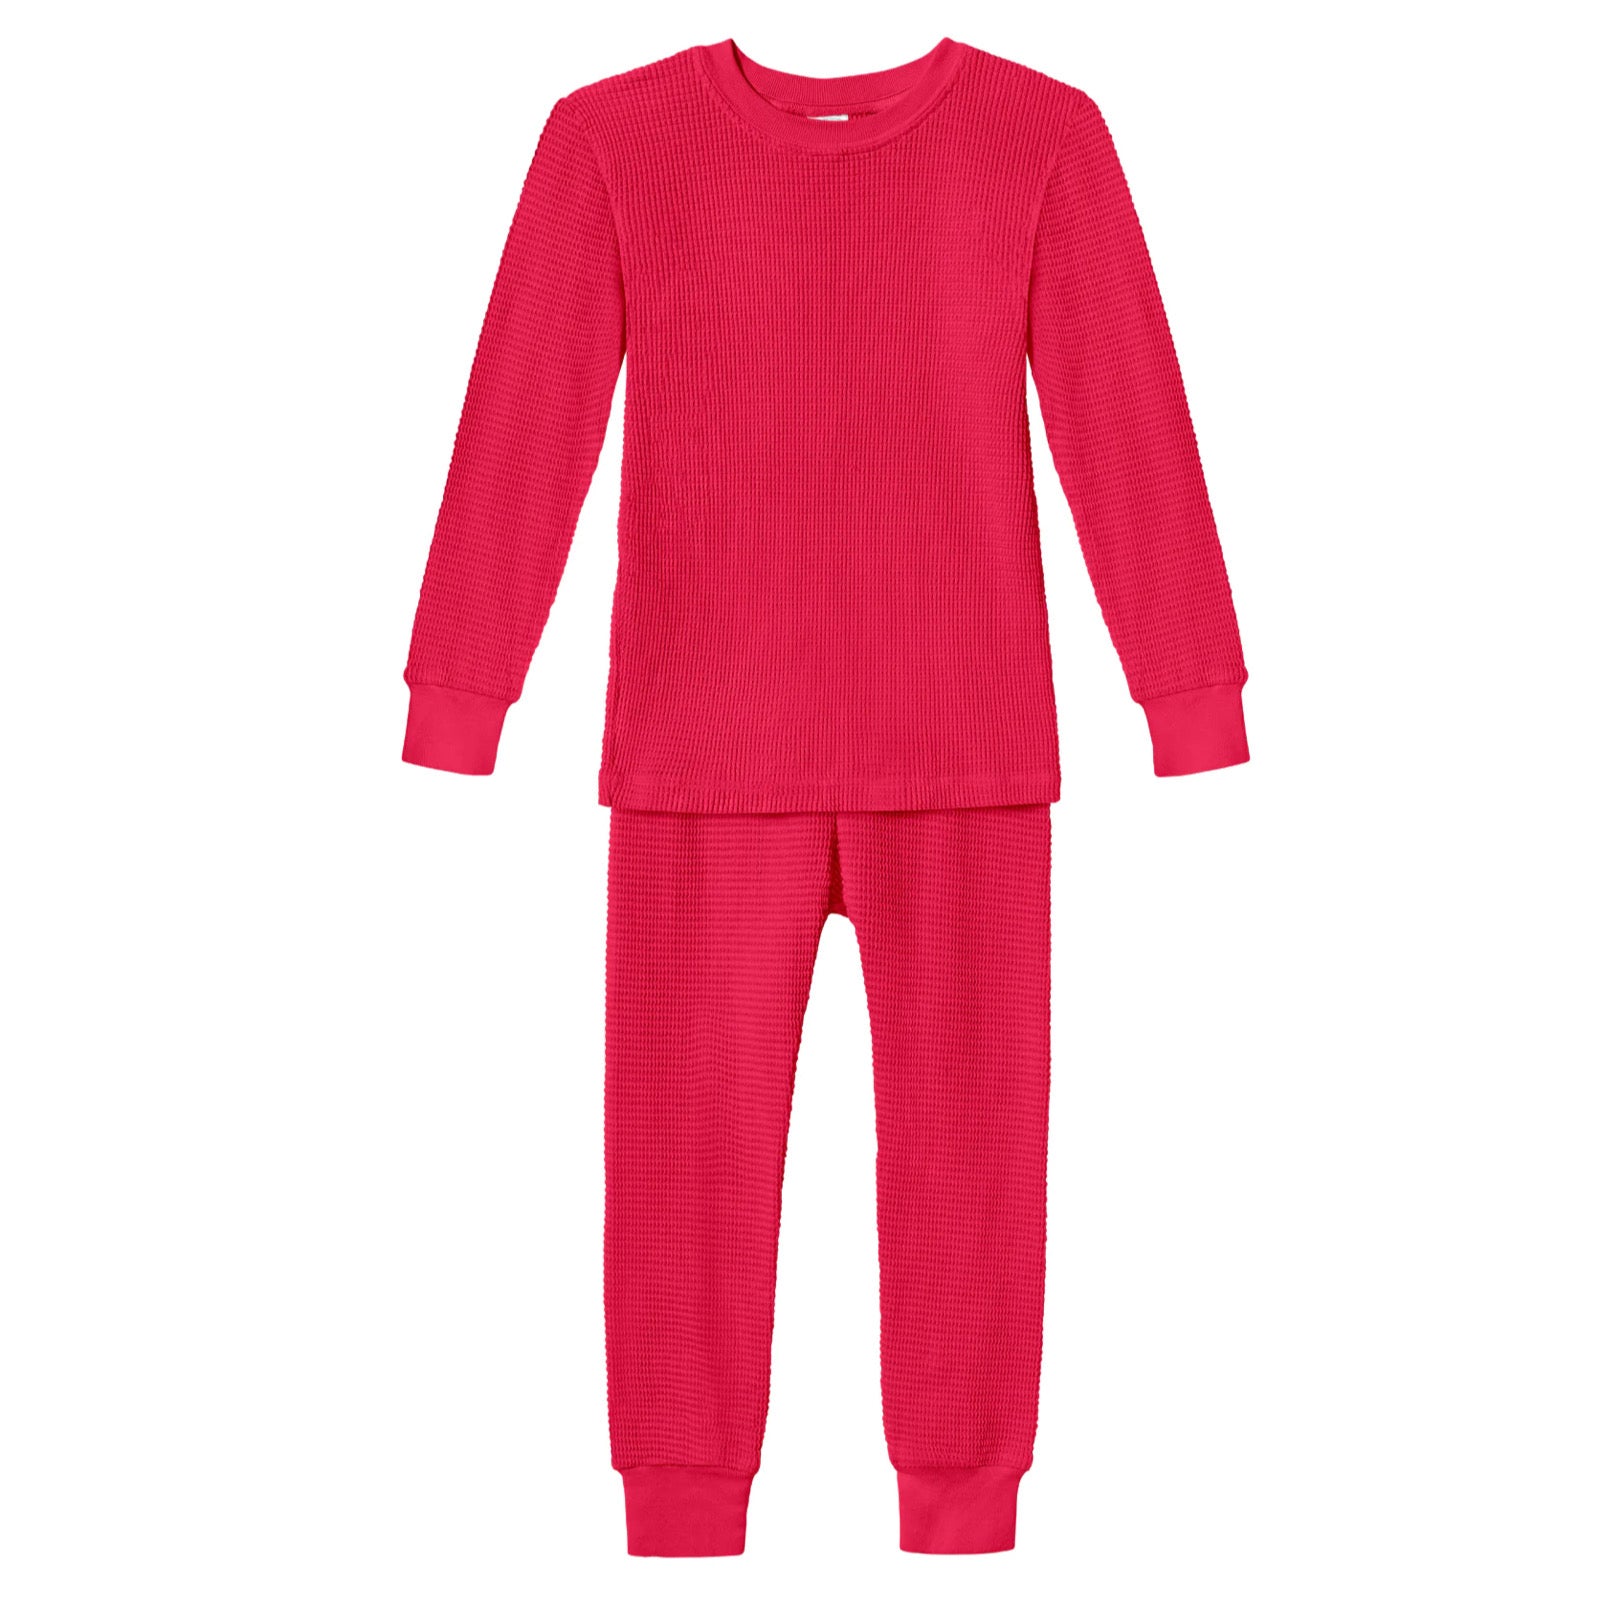 100% Cotton Toddler Long Johns Made in USA - Candy Apple Red